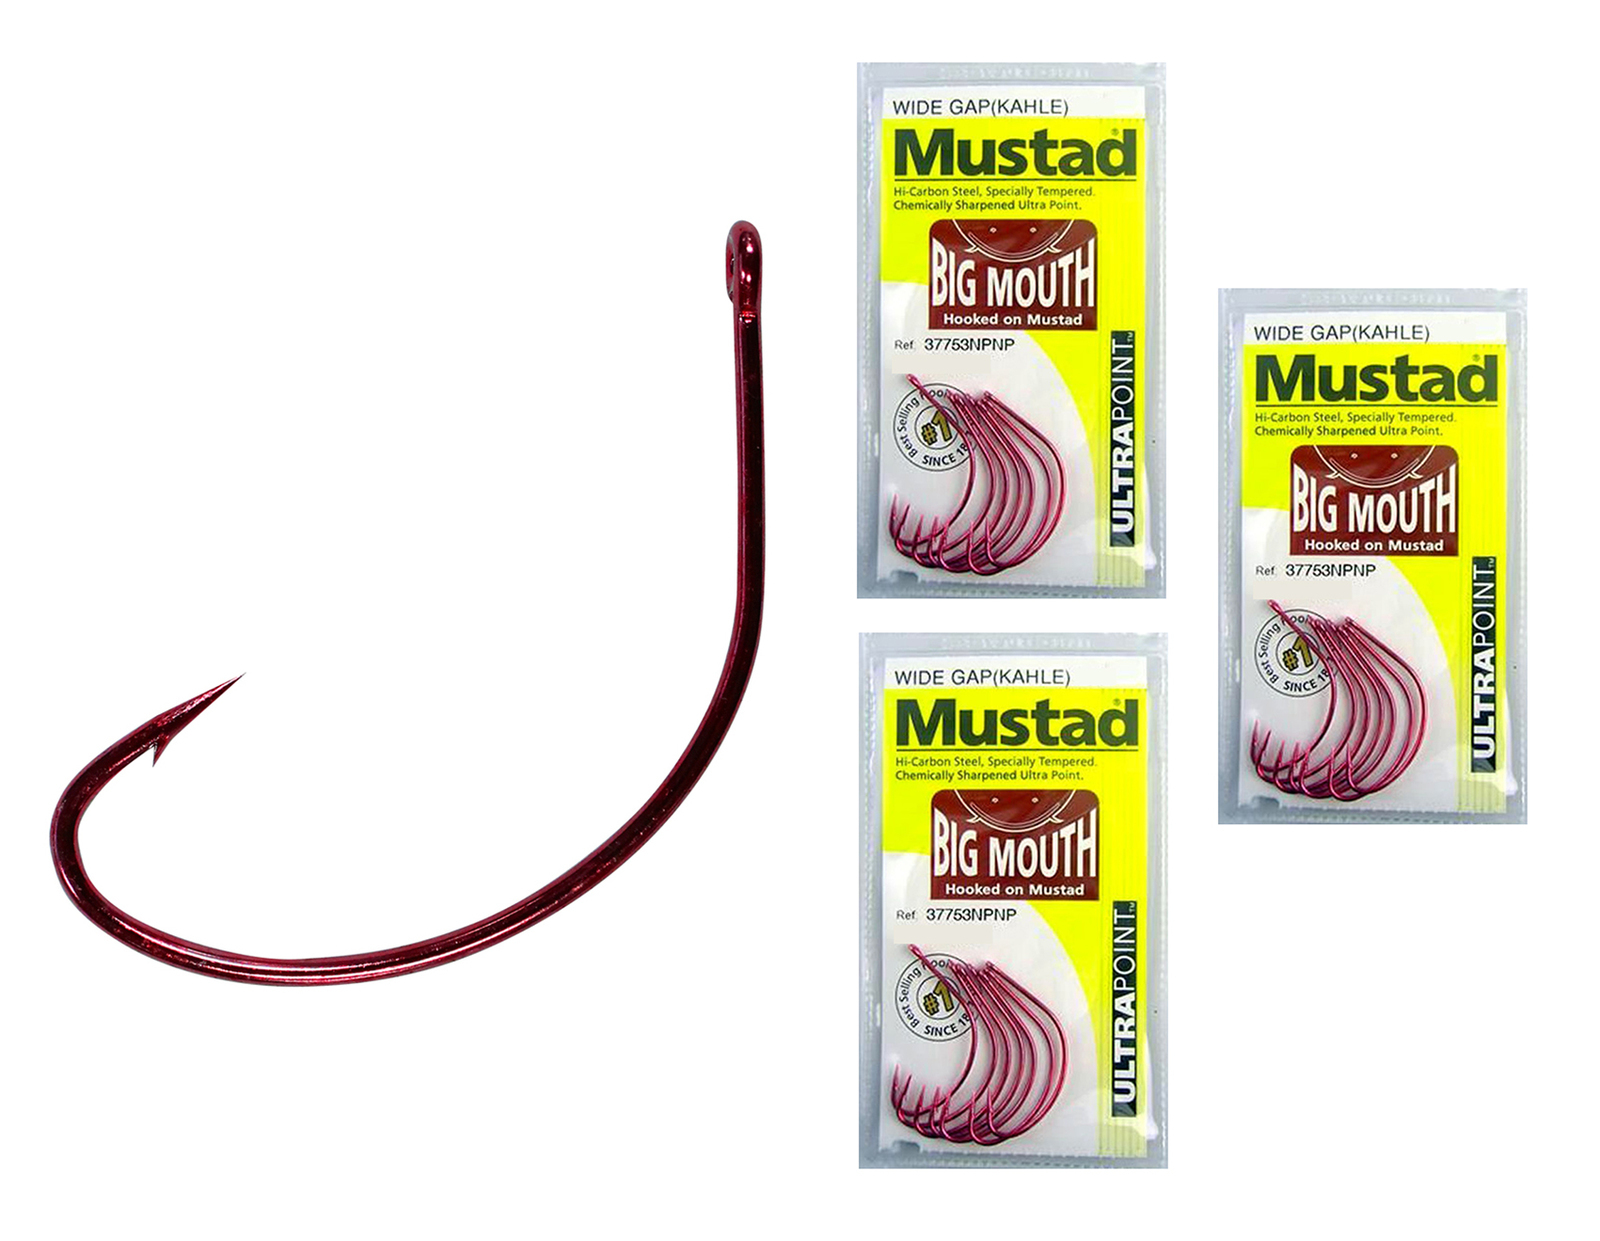 Mustad Big Mouth Size 5/0 Bulk 3 Pack- 37753npnp -Chemically Sharpened Wide  Gap